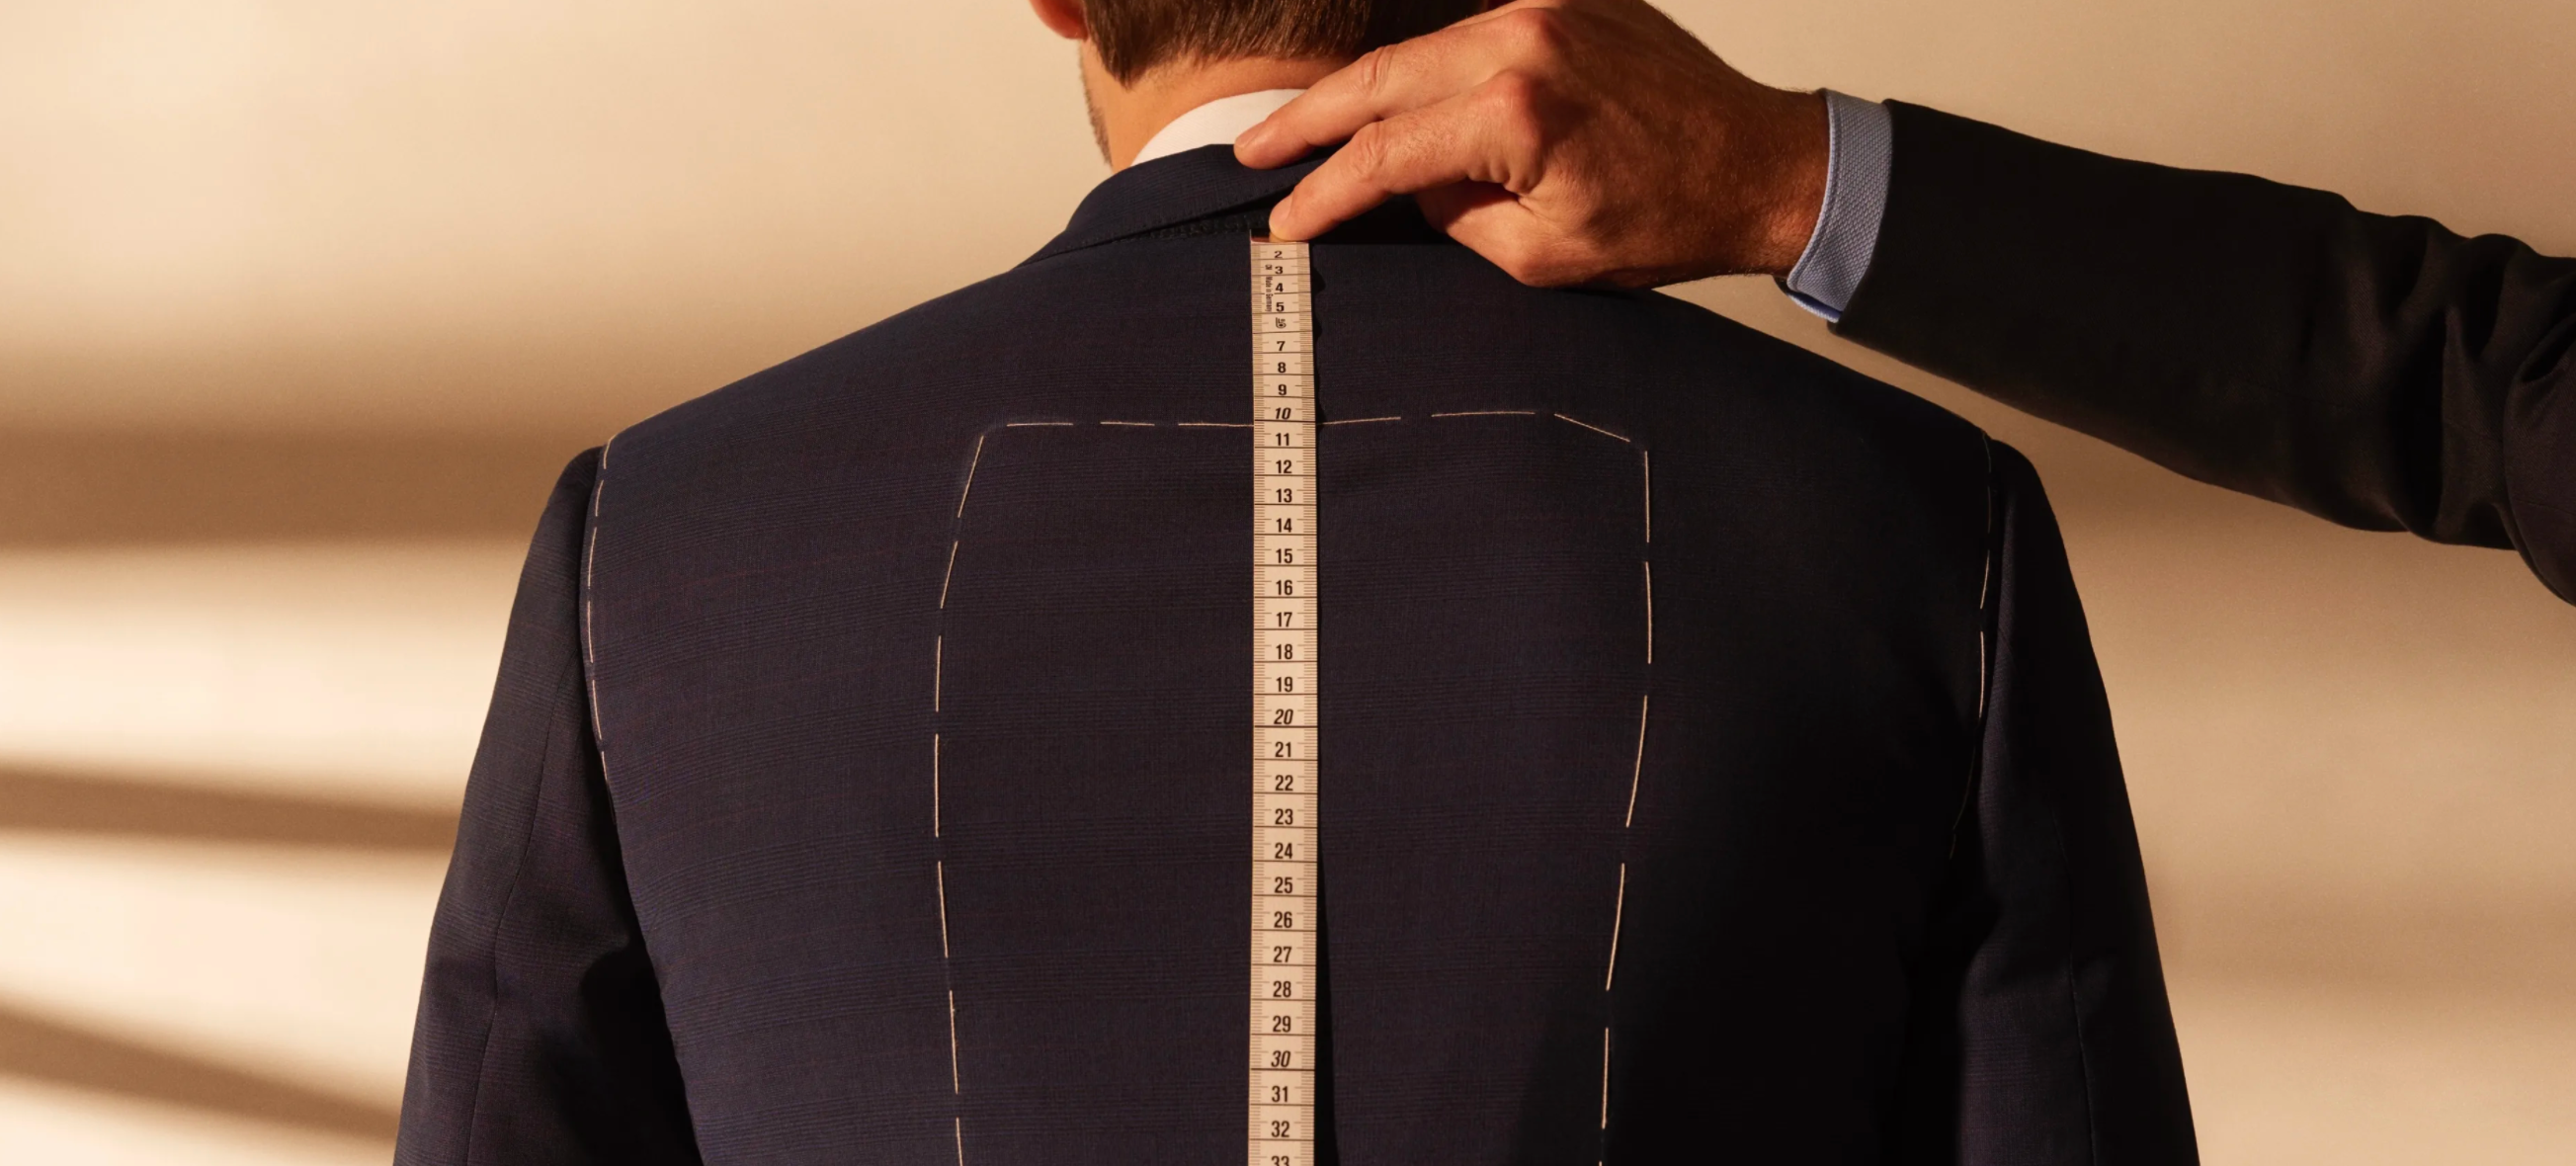 Everything You Need to Know Before You Go to the Tailor for Alterations ·  Primer